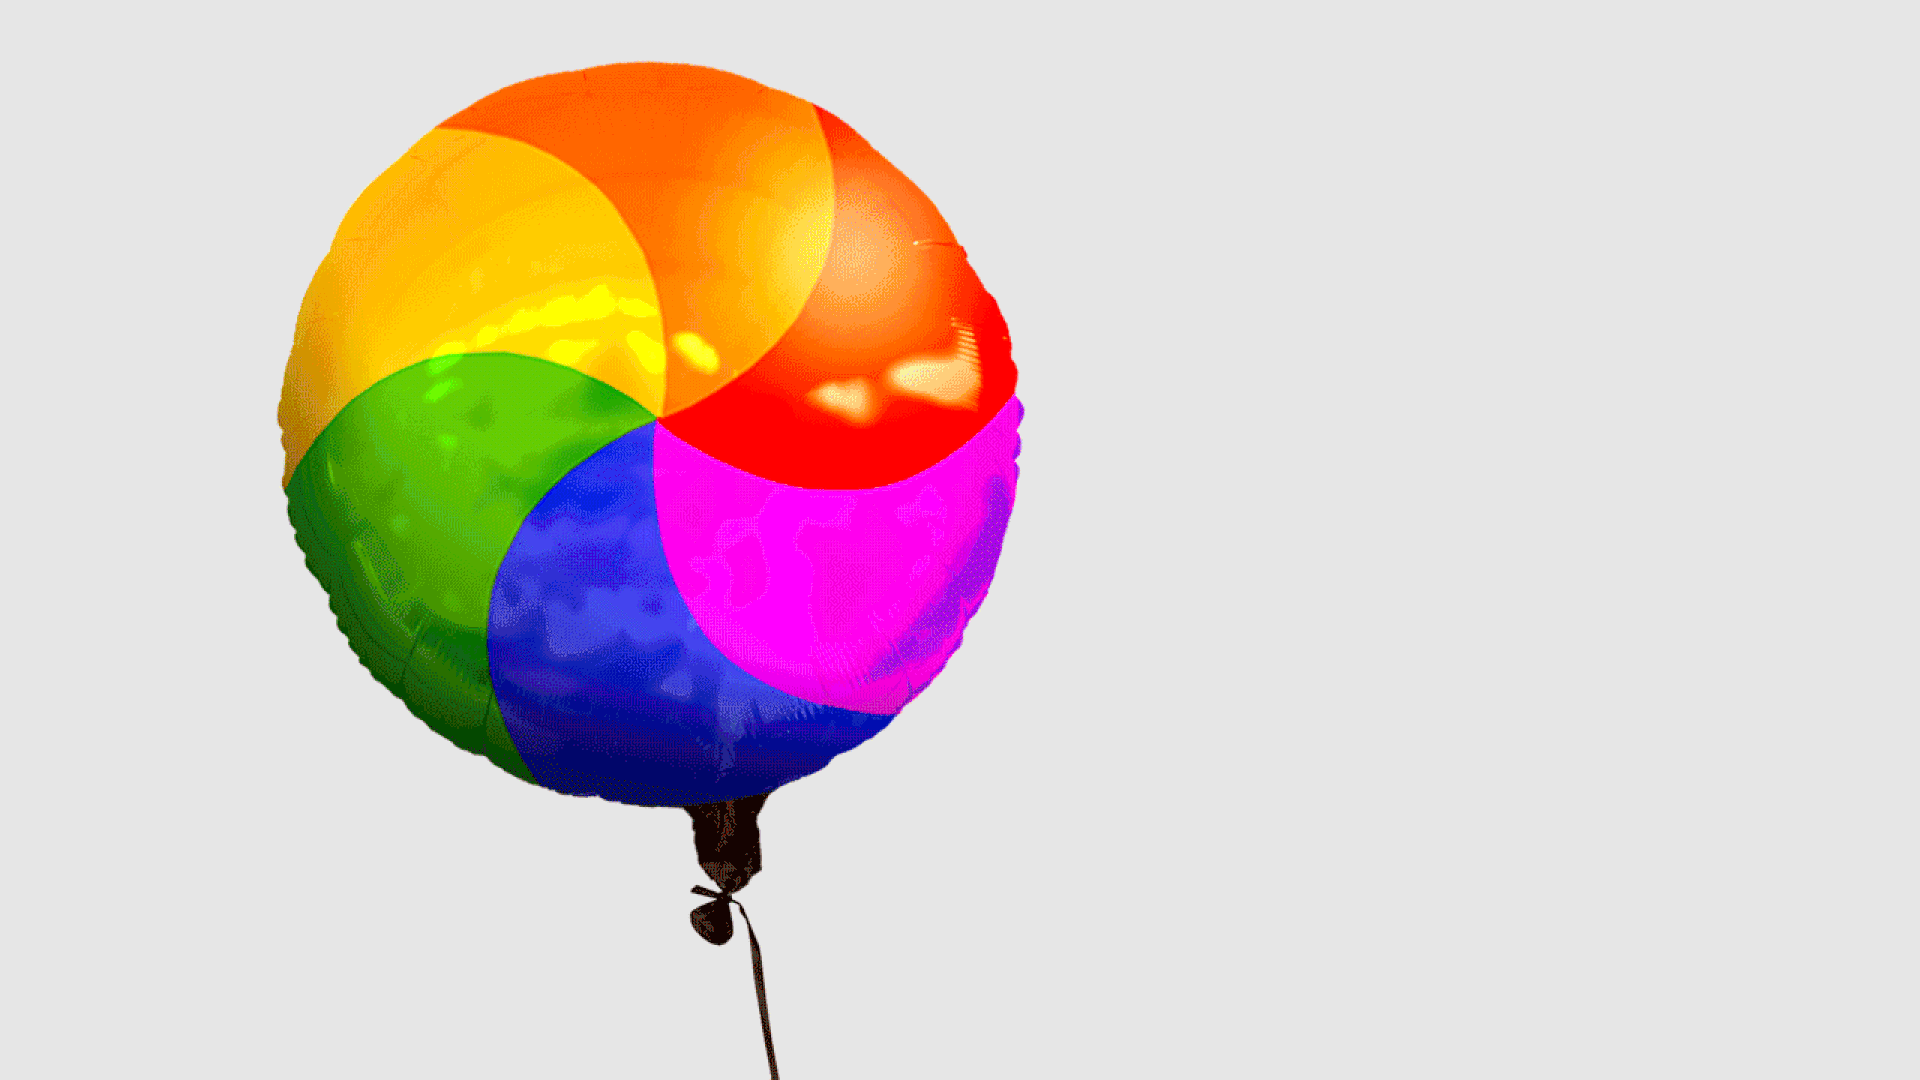 Animated illustration of a loading spinner graphic inflated and tied like a balloon